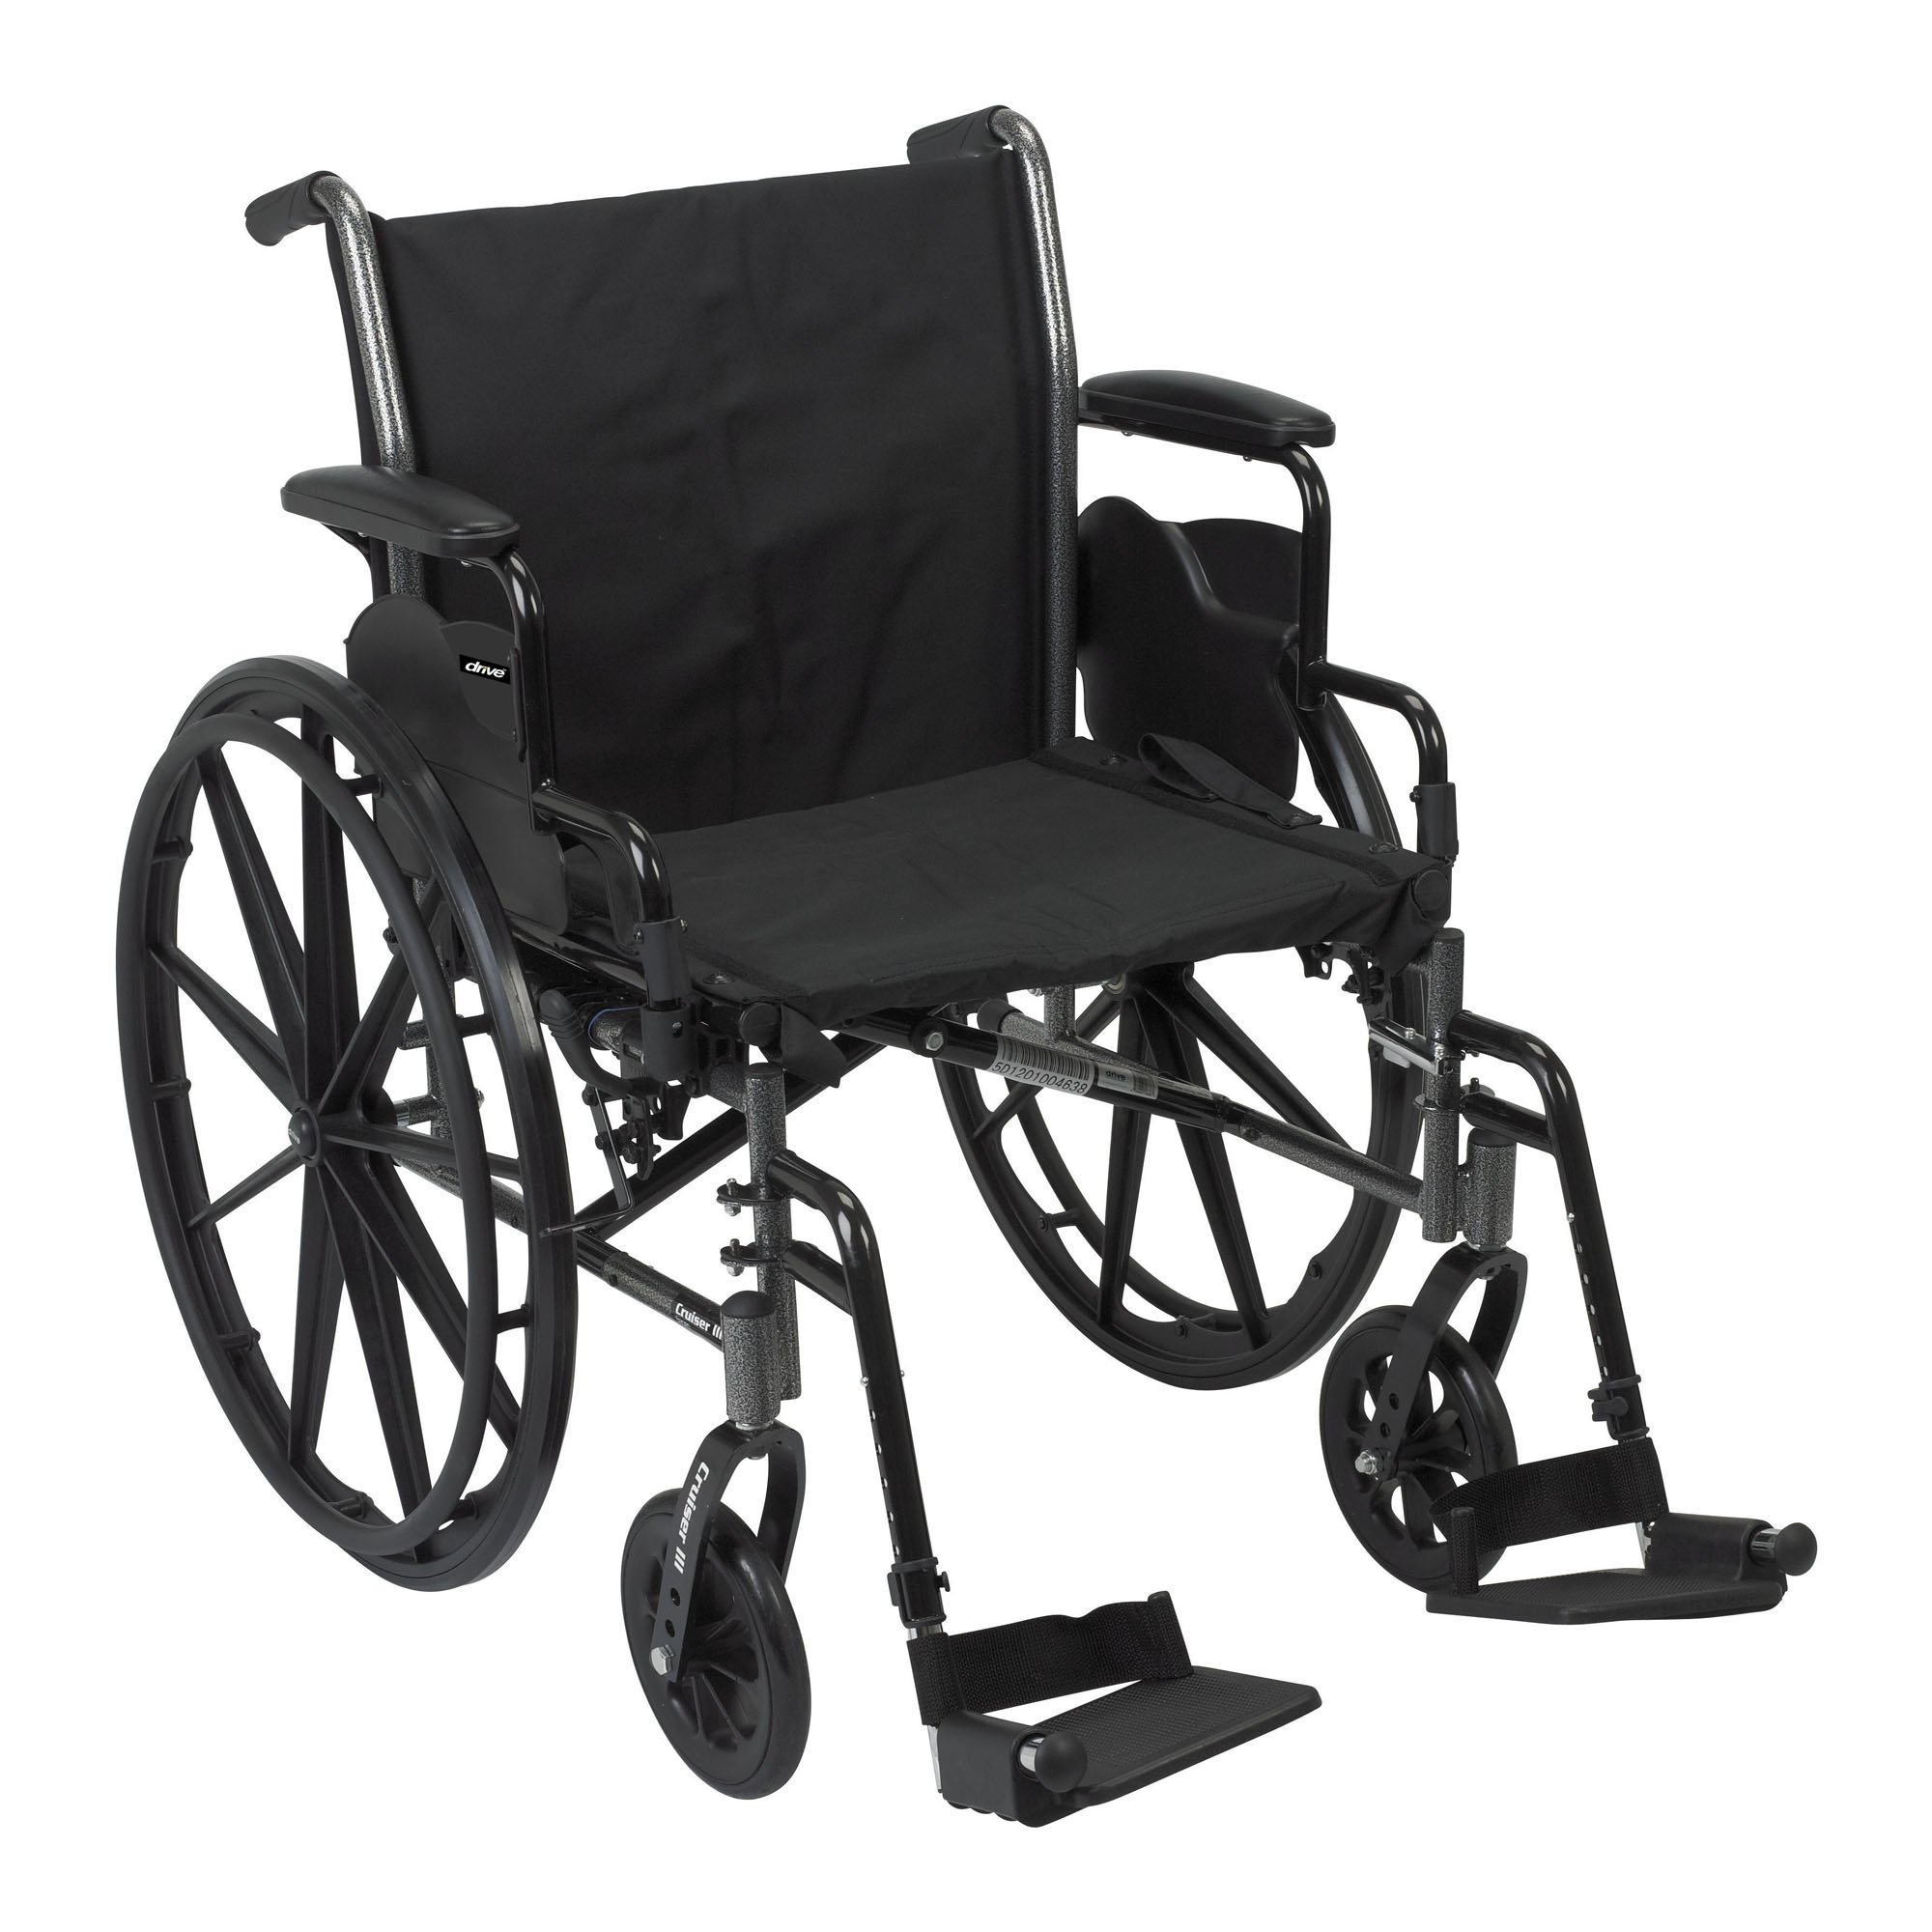 McKesson Lightweight Wheelchair with Flip Back, Padded, Removable Arm, Composite Mag Wheel, 20 in. Seat, Swing-Away Footrest, 300 lbs.